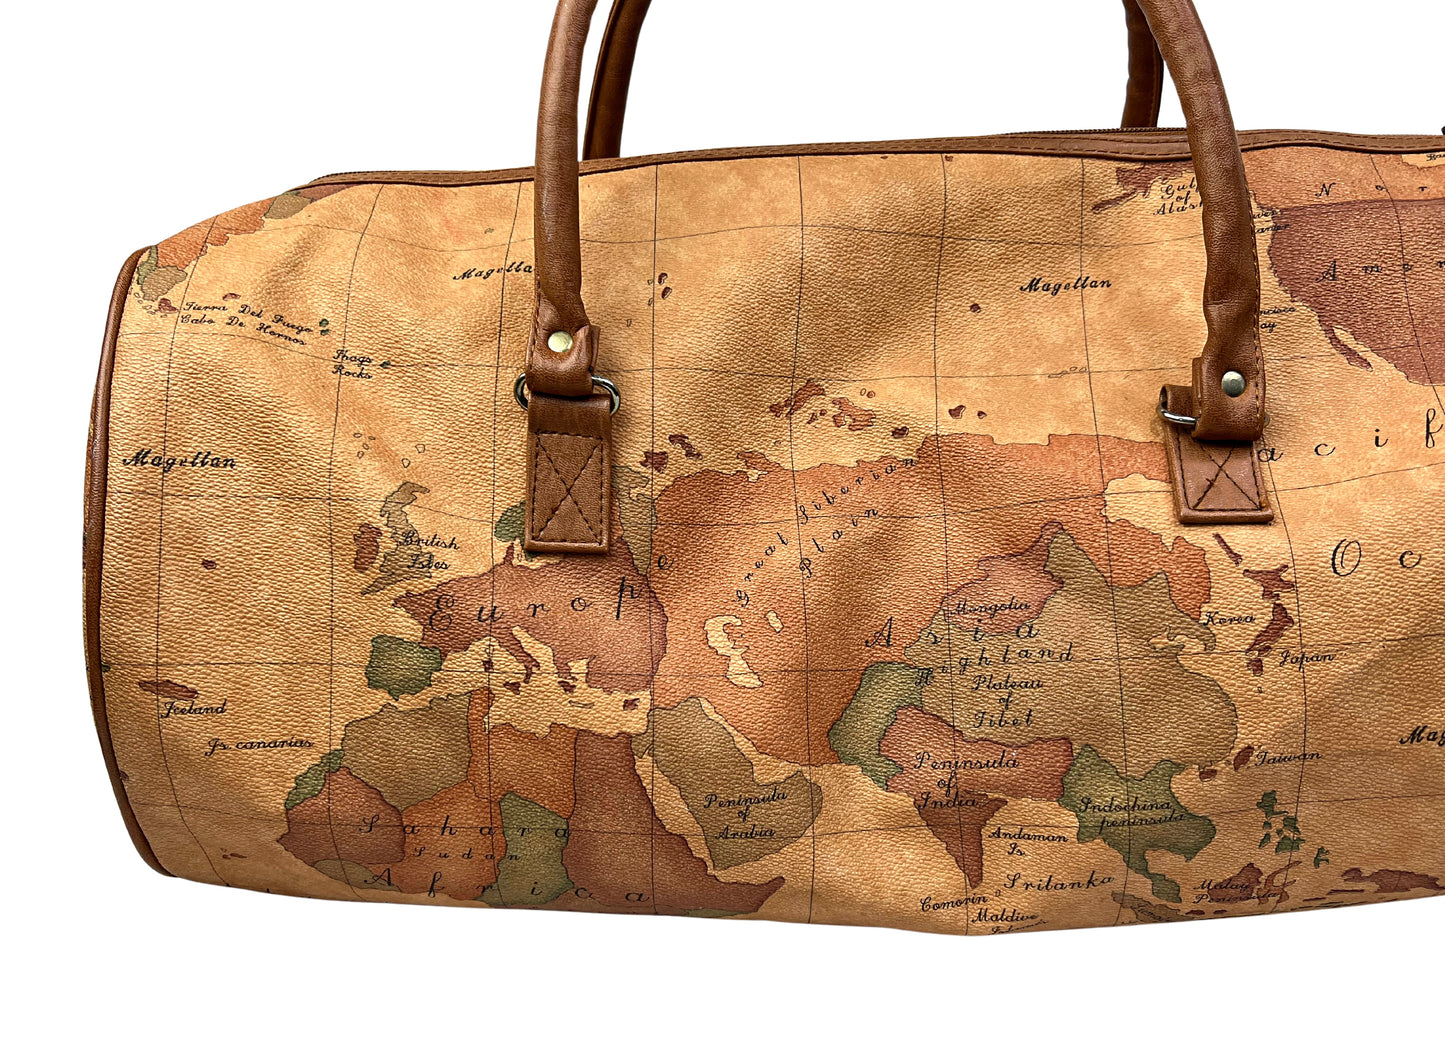 90’s Geography Map Print Faux Vegan Leather Travel Luggage Duffle Bag